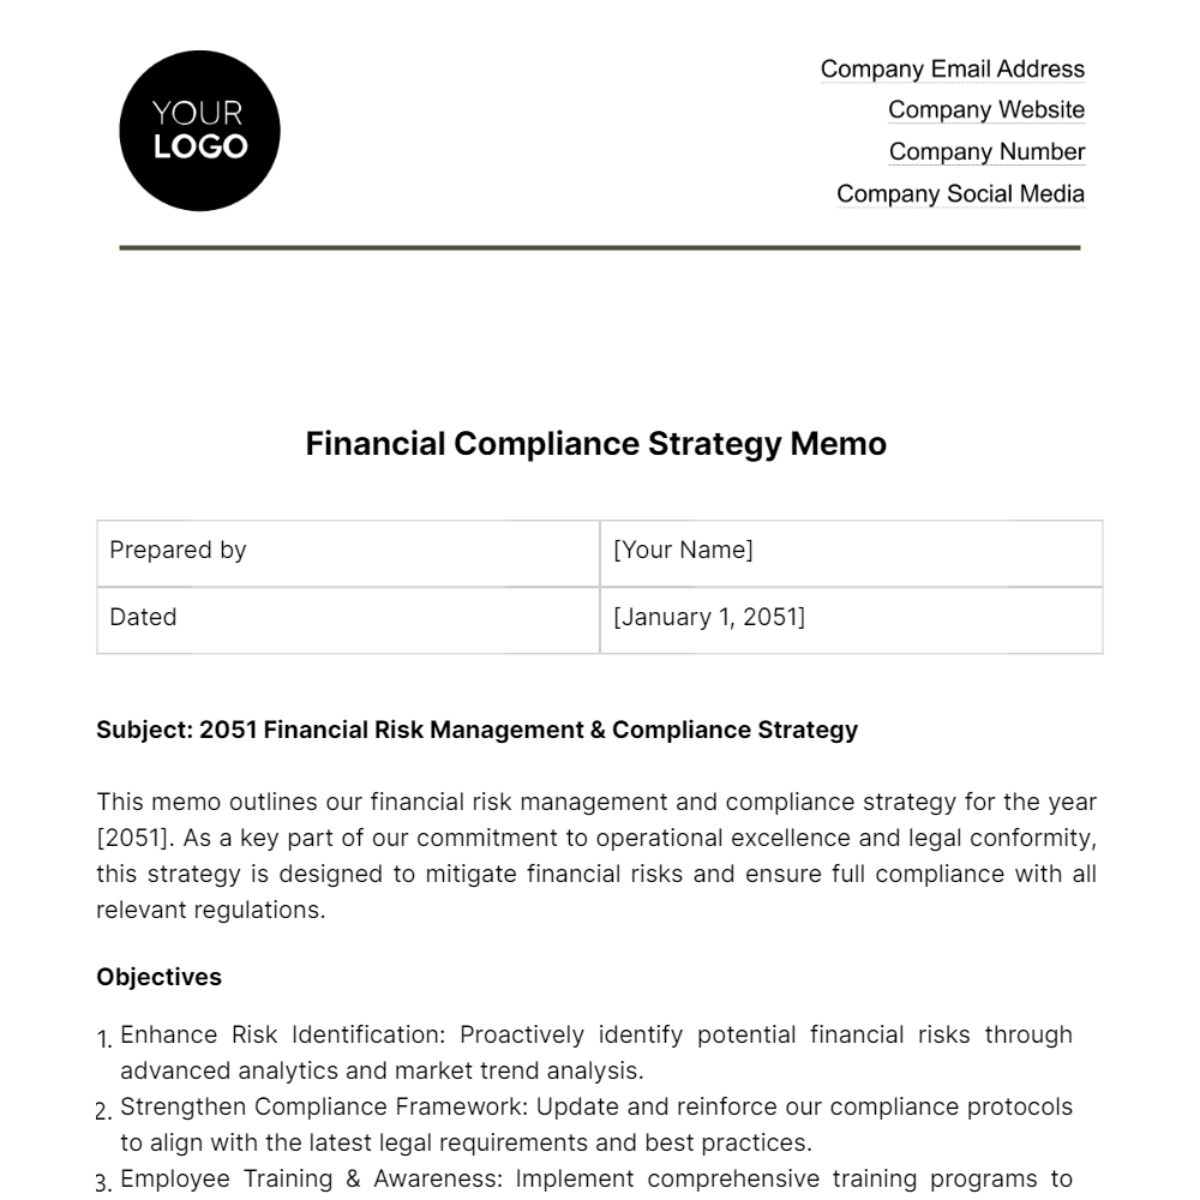 Financial Compliance Strategy Memo Template